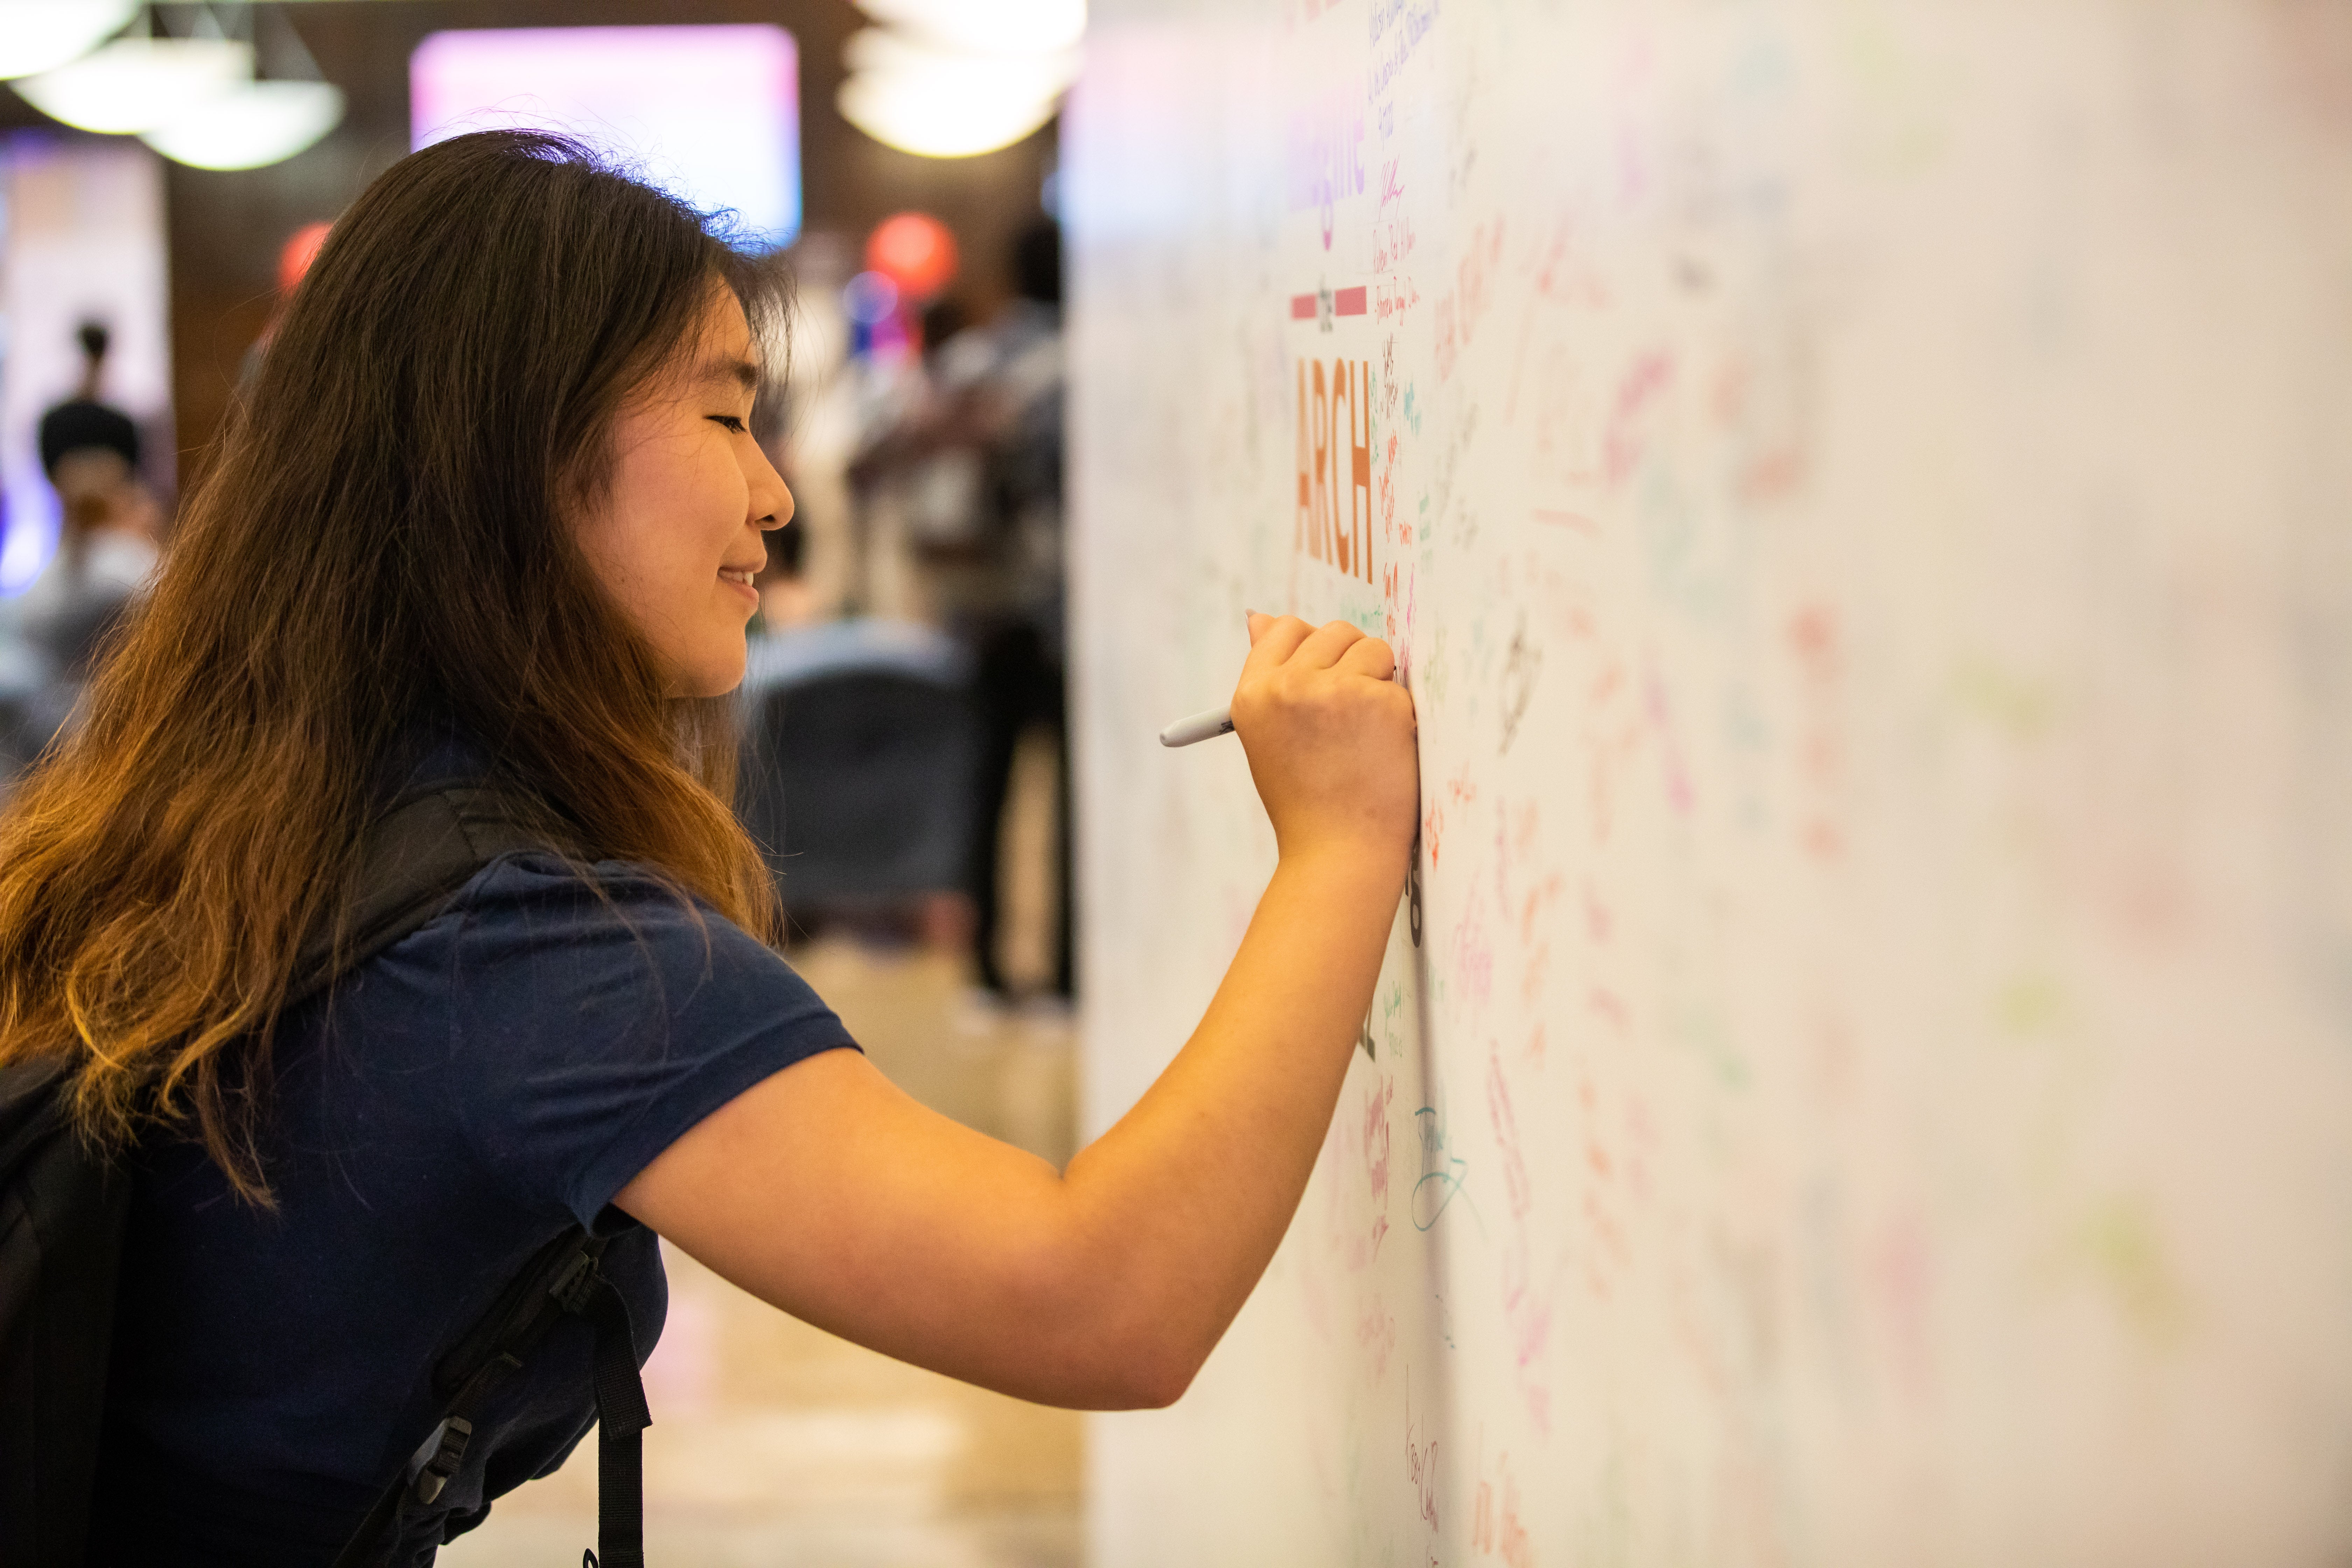 Penn student signs the ARCH Reimagine wall